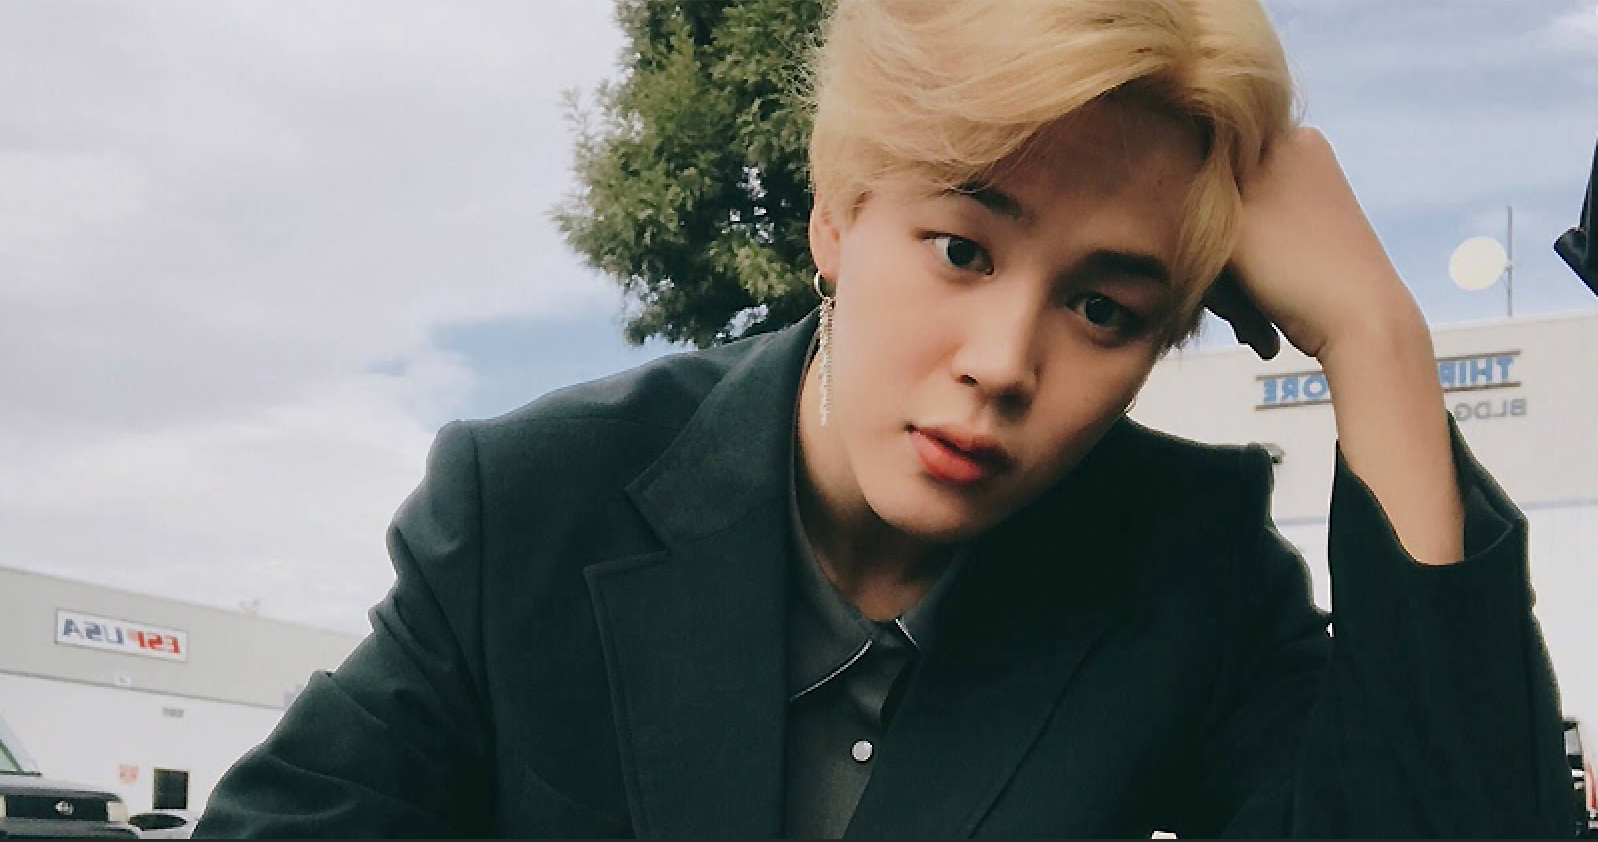 BTS Jimin Becomes the 1st Member to Surpass This Milestone on Instagram